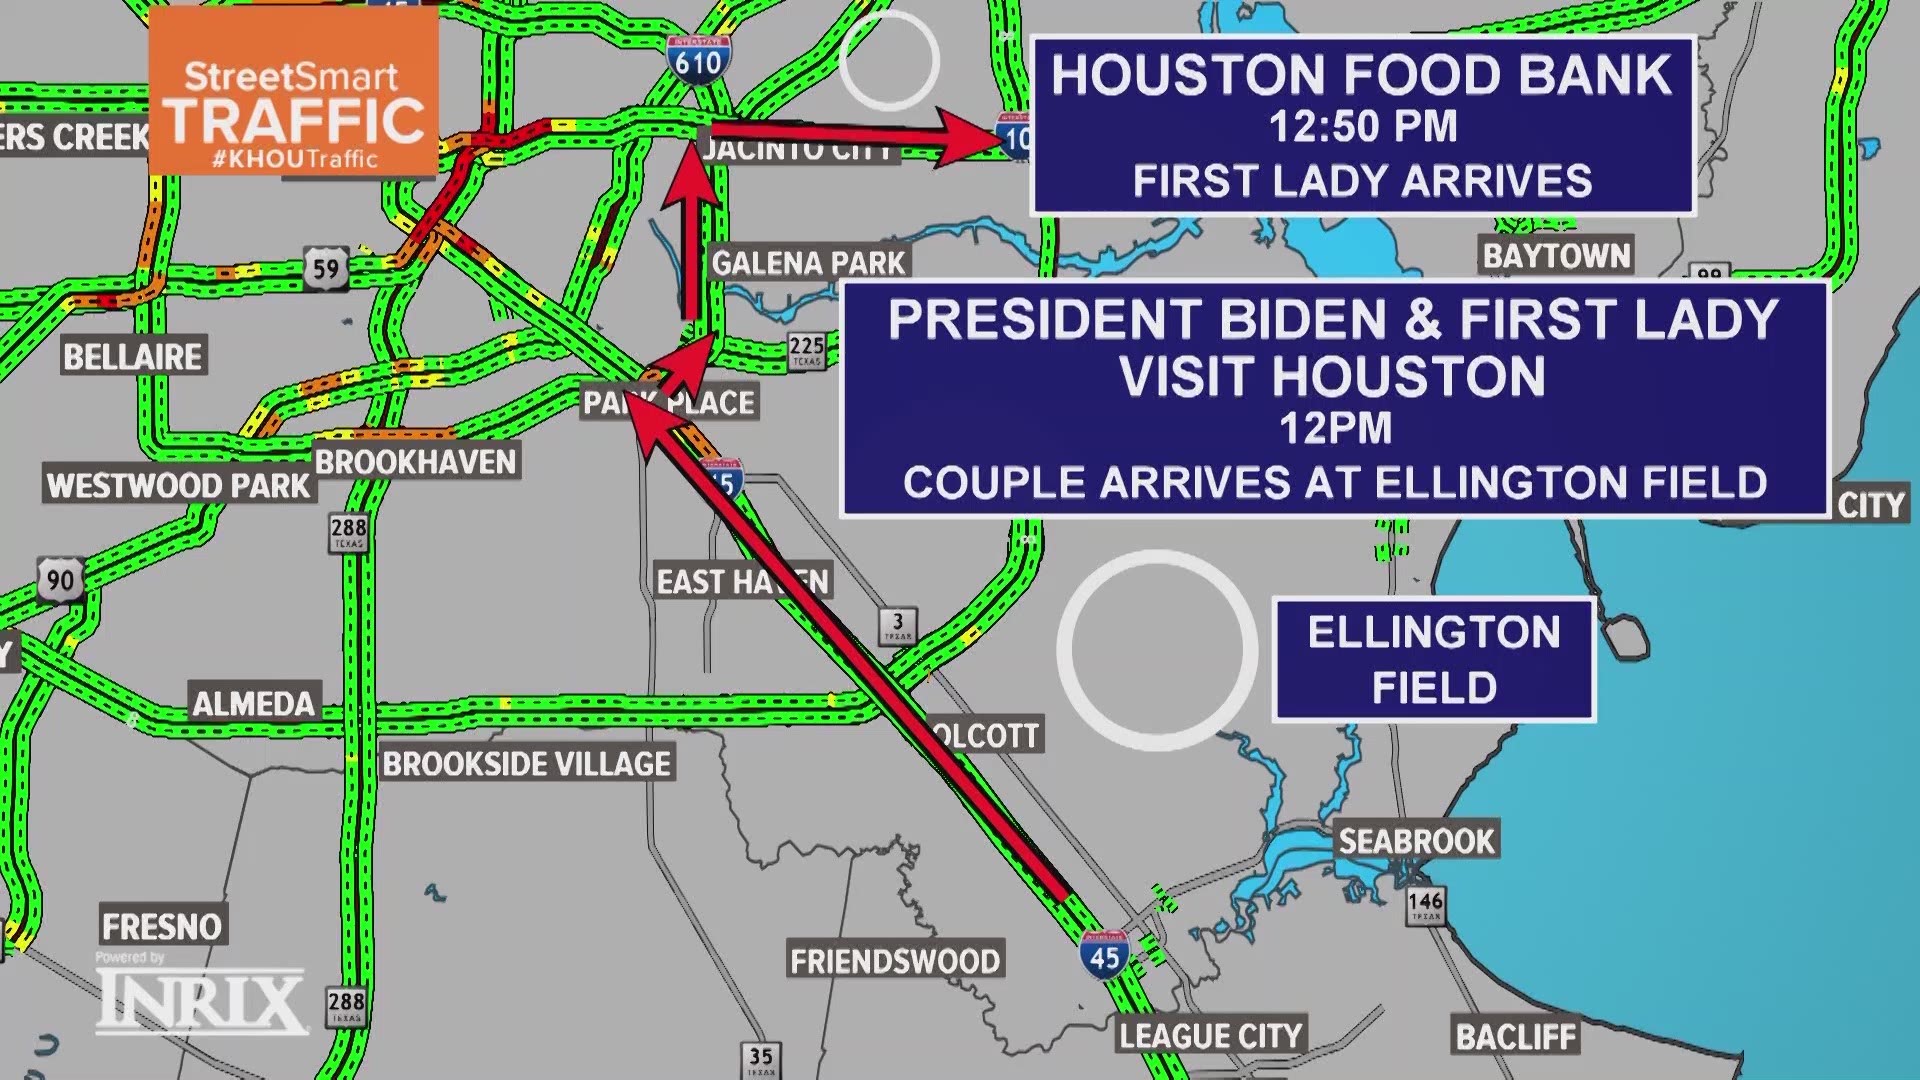 Drivers should expect traffic delays around Houston Friday afternoon for President Biden and First Lady Dr. Jill Biden's visit.